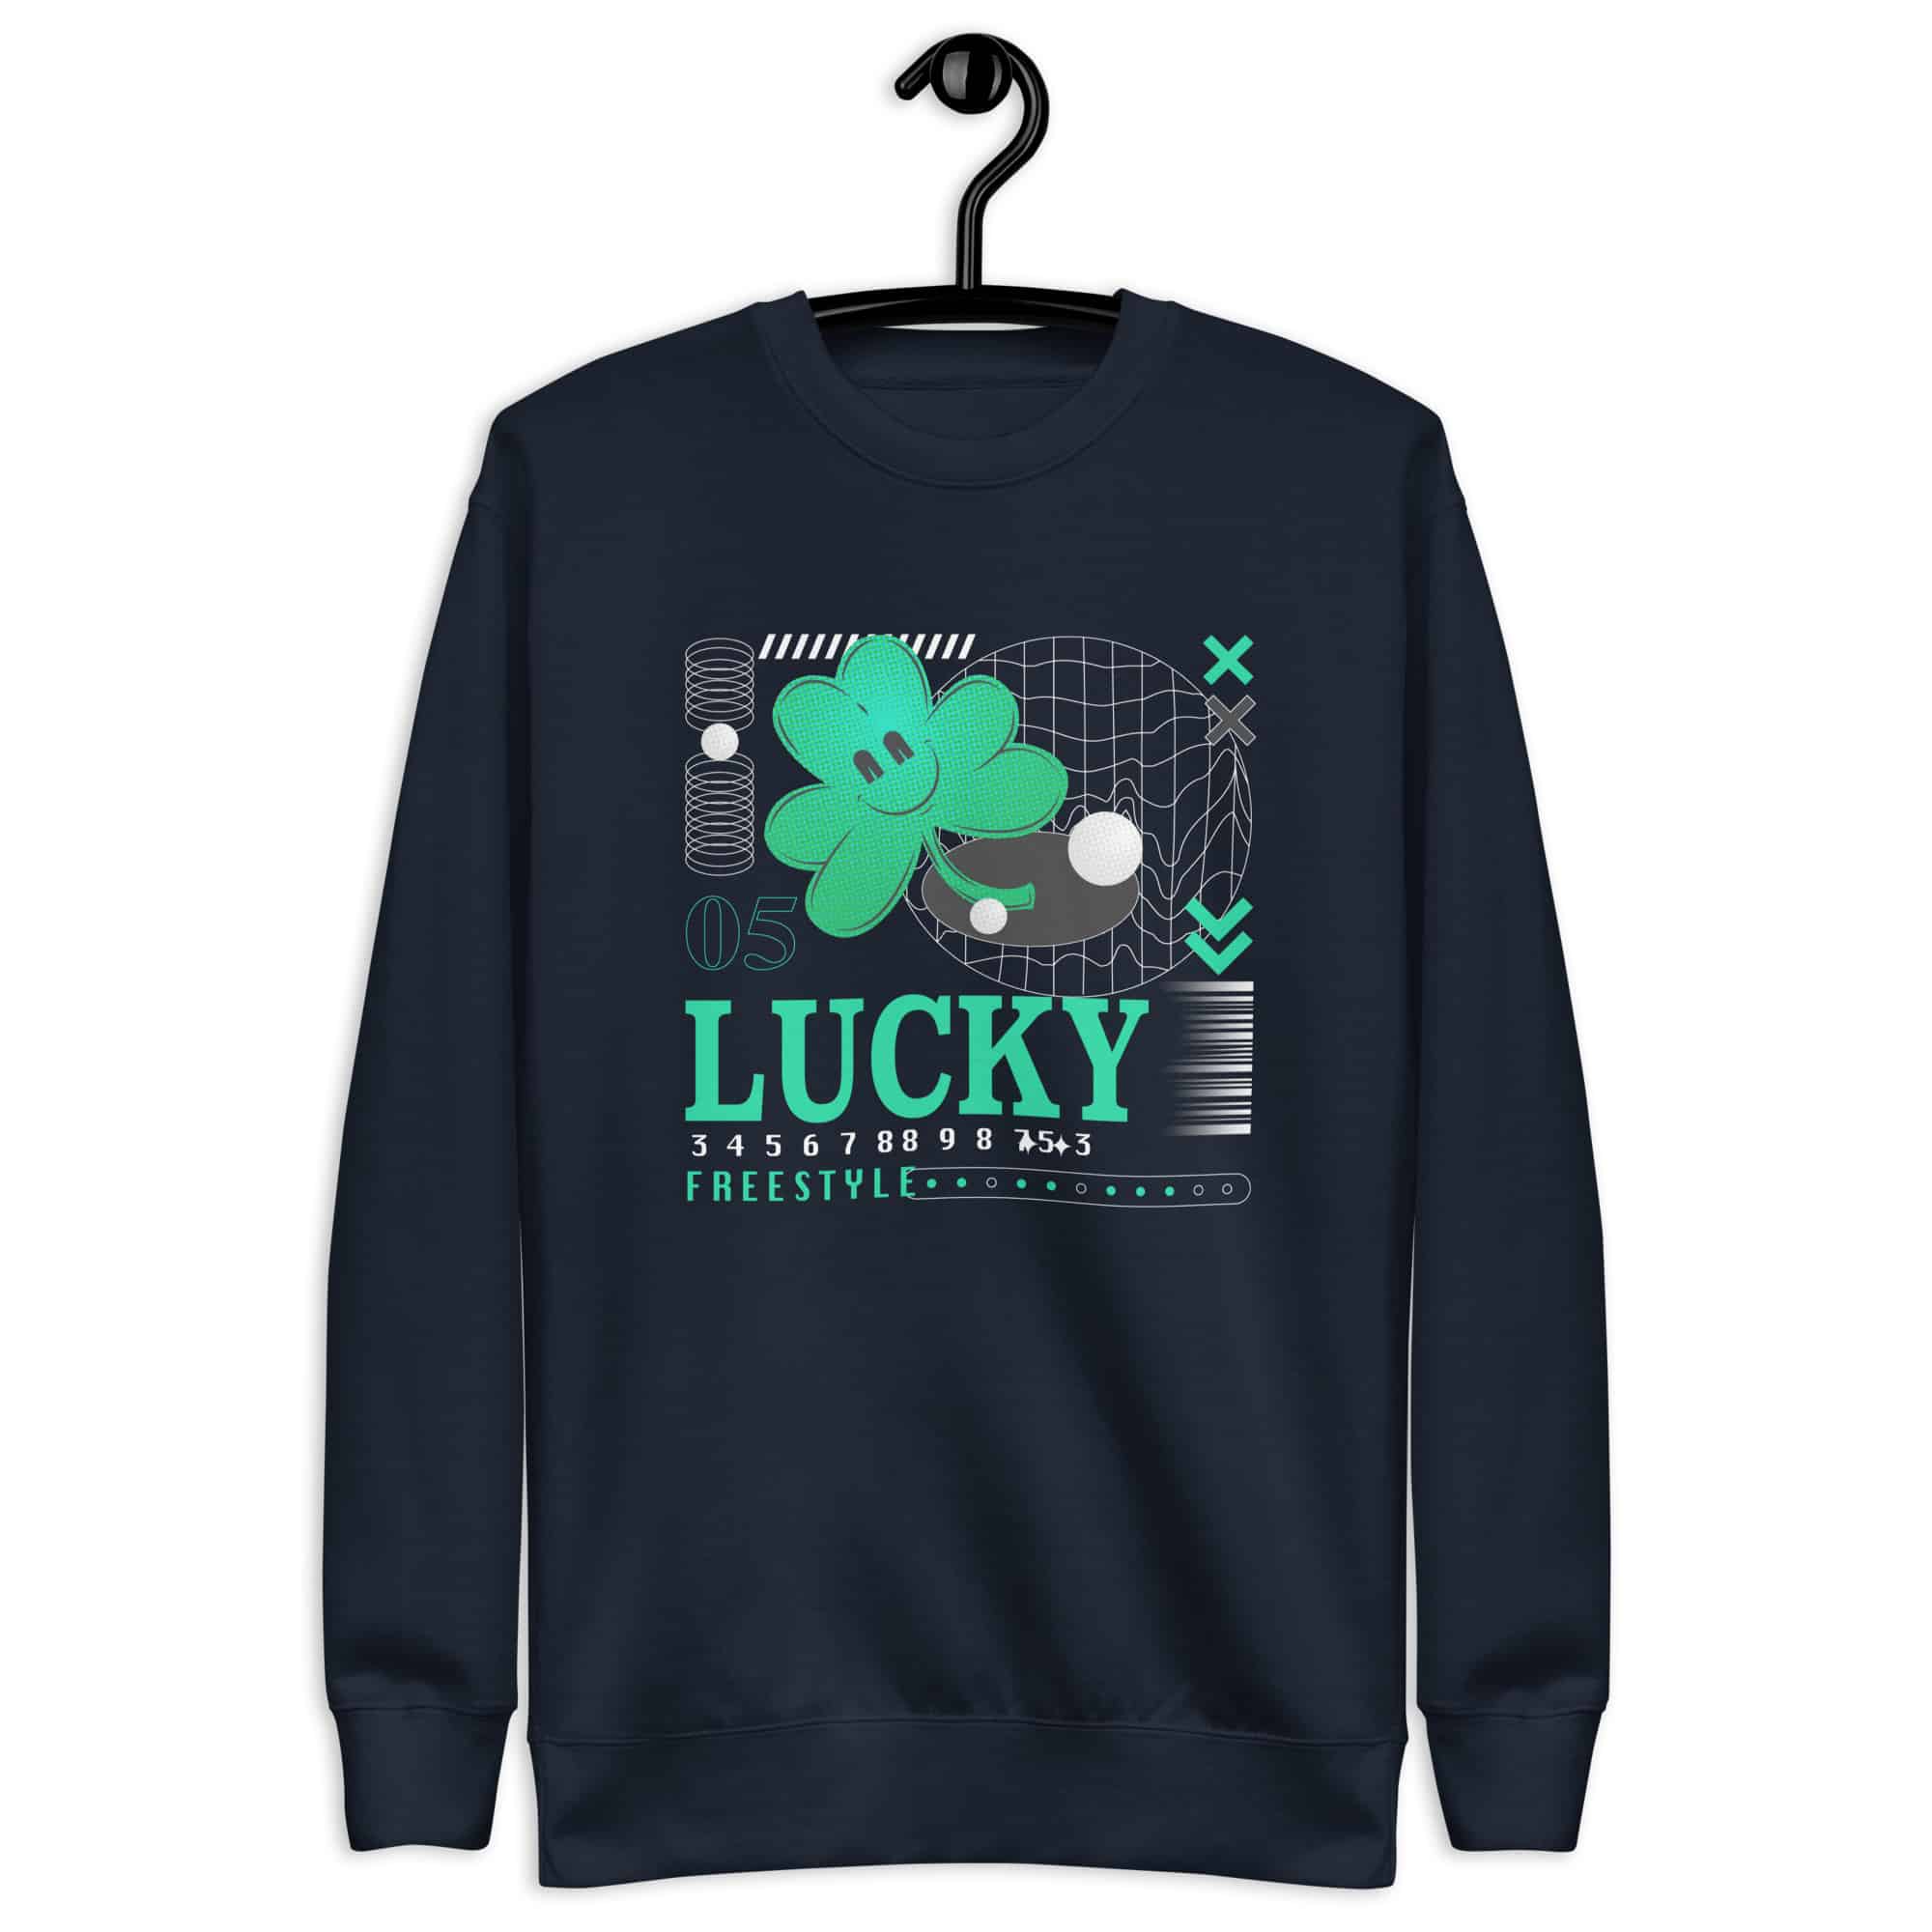 Lucky Premium Sweatshirt Men's graphic t-shirts Men's designer shirts Premium sweatshirts Unisex hoodies Premium hooded sweatshirts Designer sweatshirts High-quality sweatshirts Luxury sweatshirts Unisex fleece sweatshirts Premium pullover sweatshirts Unisex heavyweight sweatshirts Premium cotton sweatshirts Video game store Gaming merchandise Gaming accessories shop Online gaming store Video game shop near me Gaming console store PC gaming store Gaming gear shop Retro gaming shop Board game shop Anime merchandise Anime store online Japanese anime shop Anime figurines Manga shop Anime DVDs Anime accessories Anime apparel Anime collectibles Anime gifts